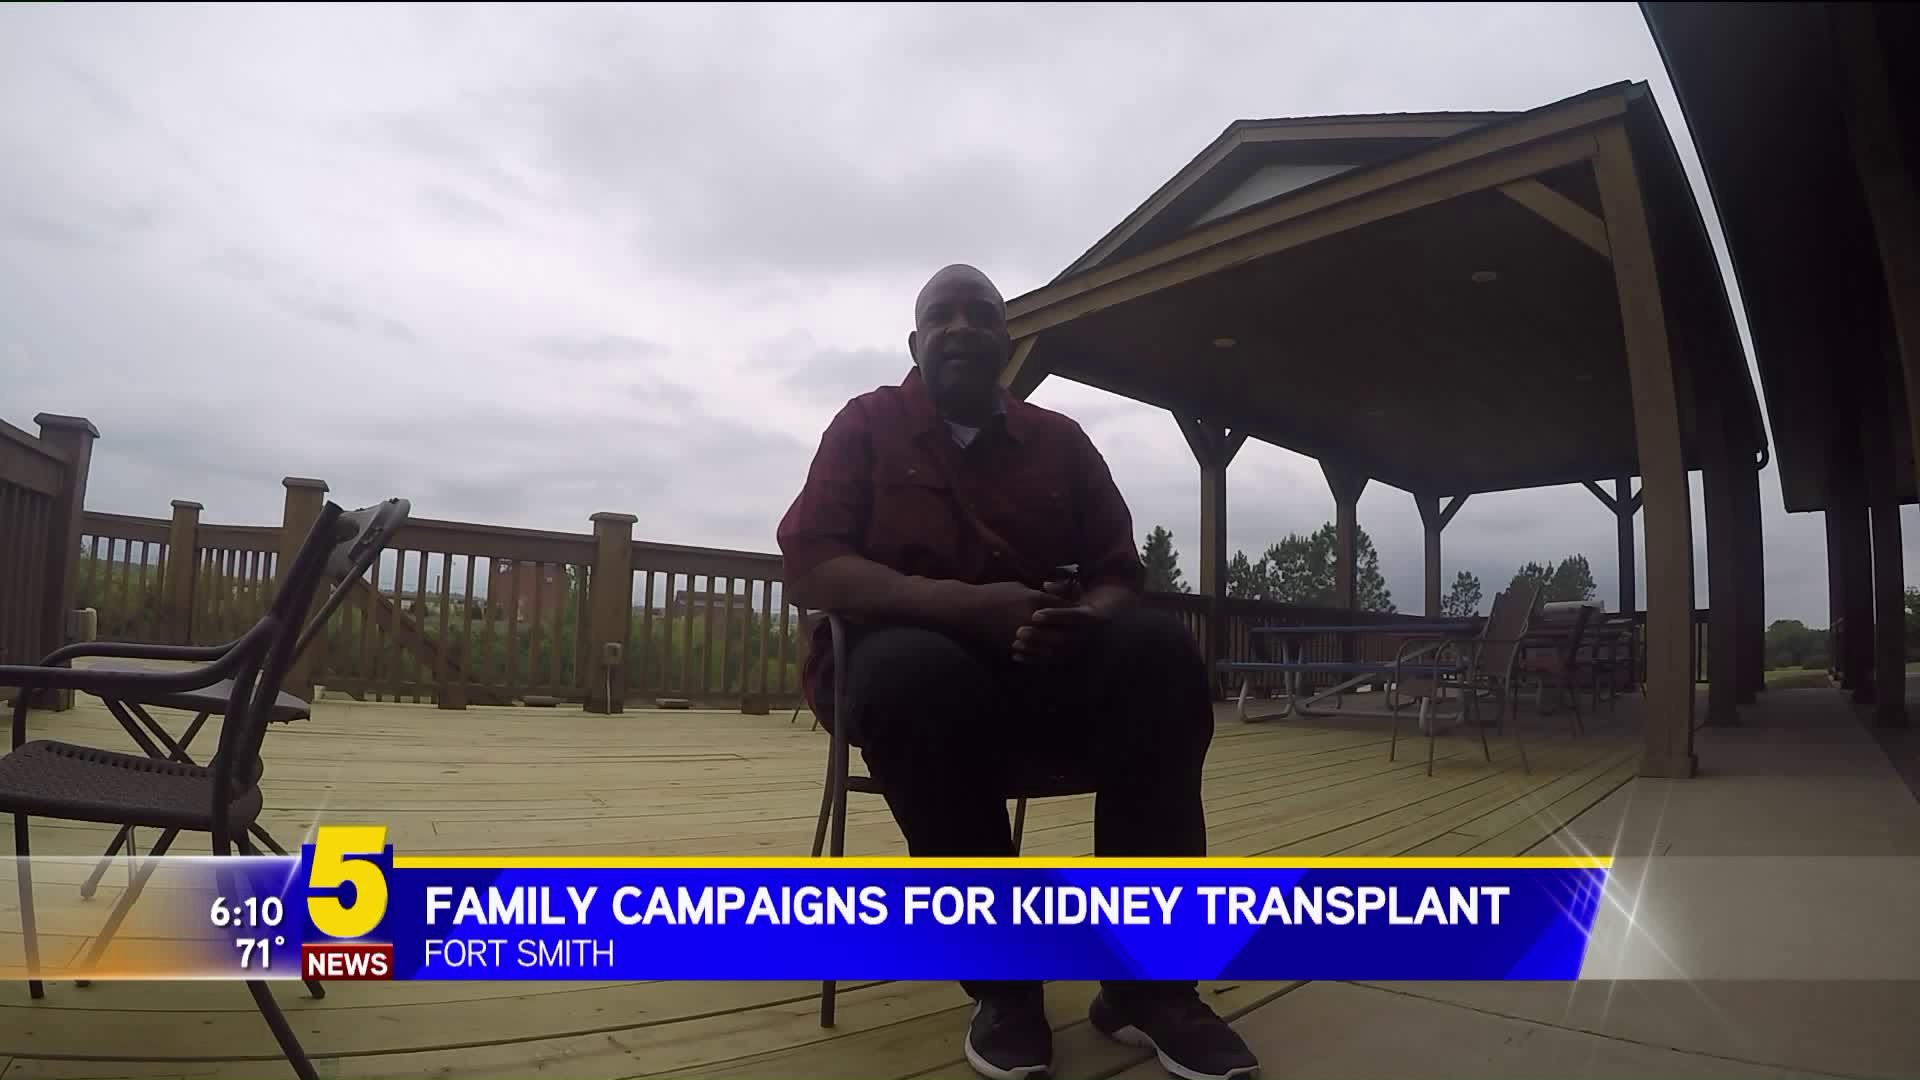 Family Campaigns For Kidney Transplant